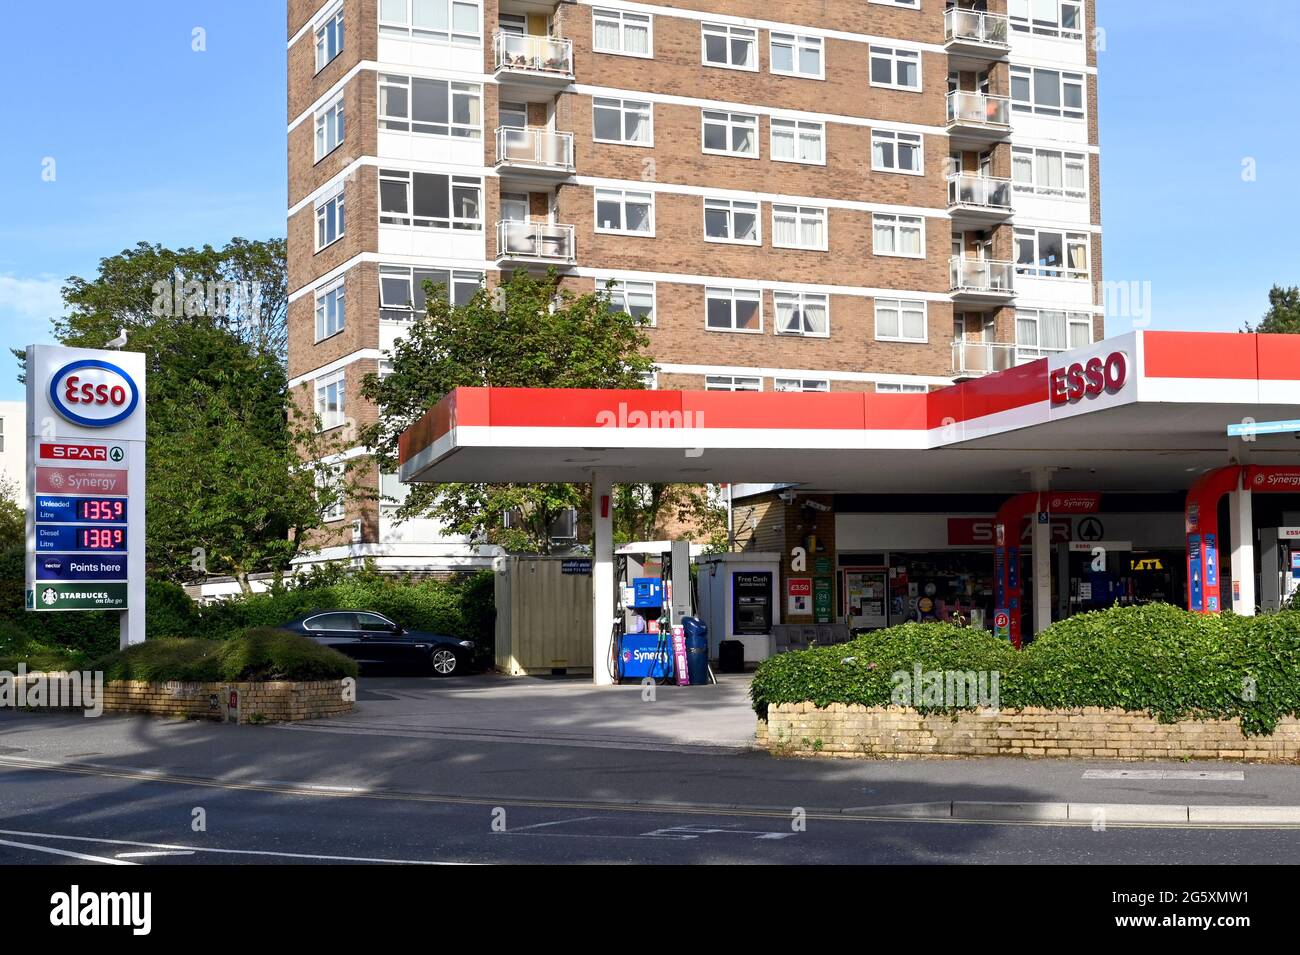 Bournemouth, England - June 2021: Exterior view of a petrol filling station supplied by the Esso oil company Stock Photo